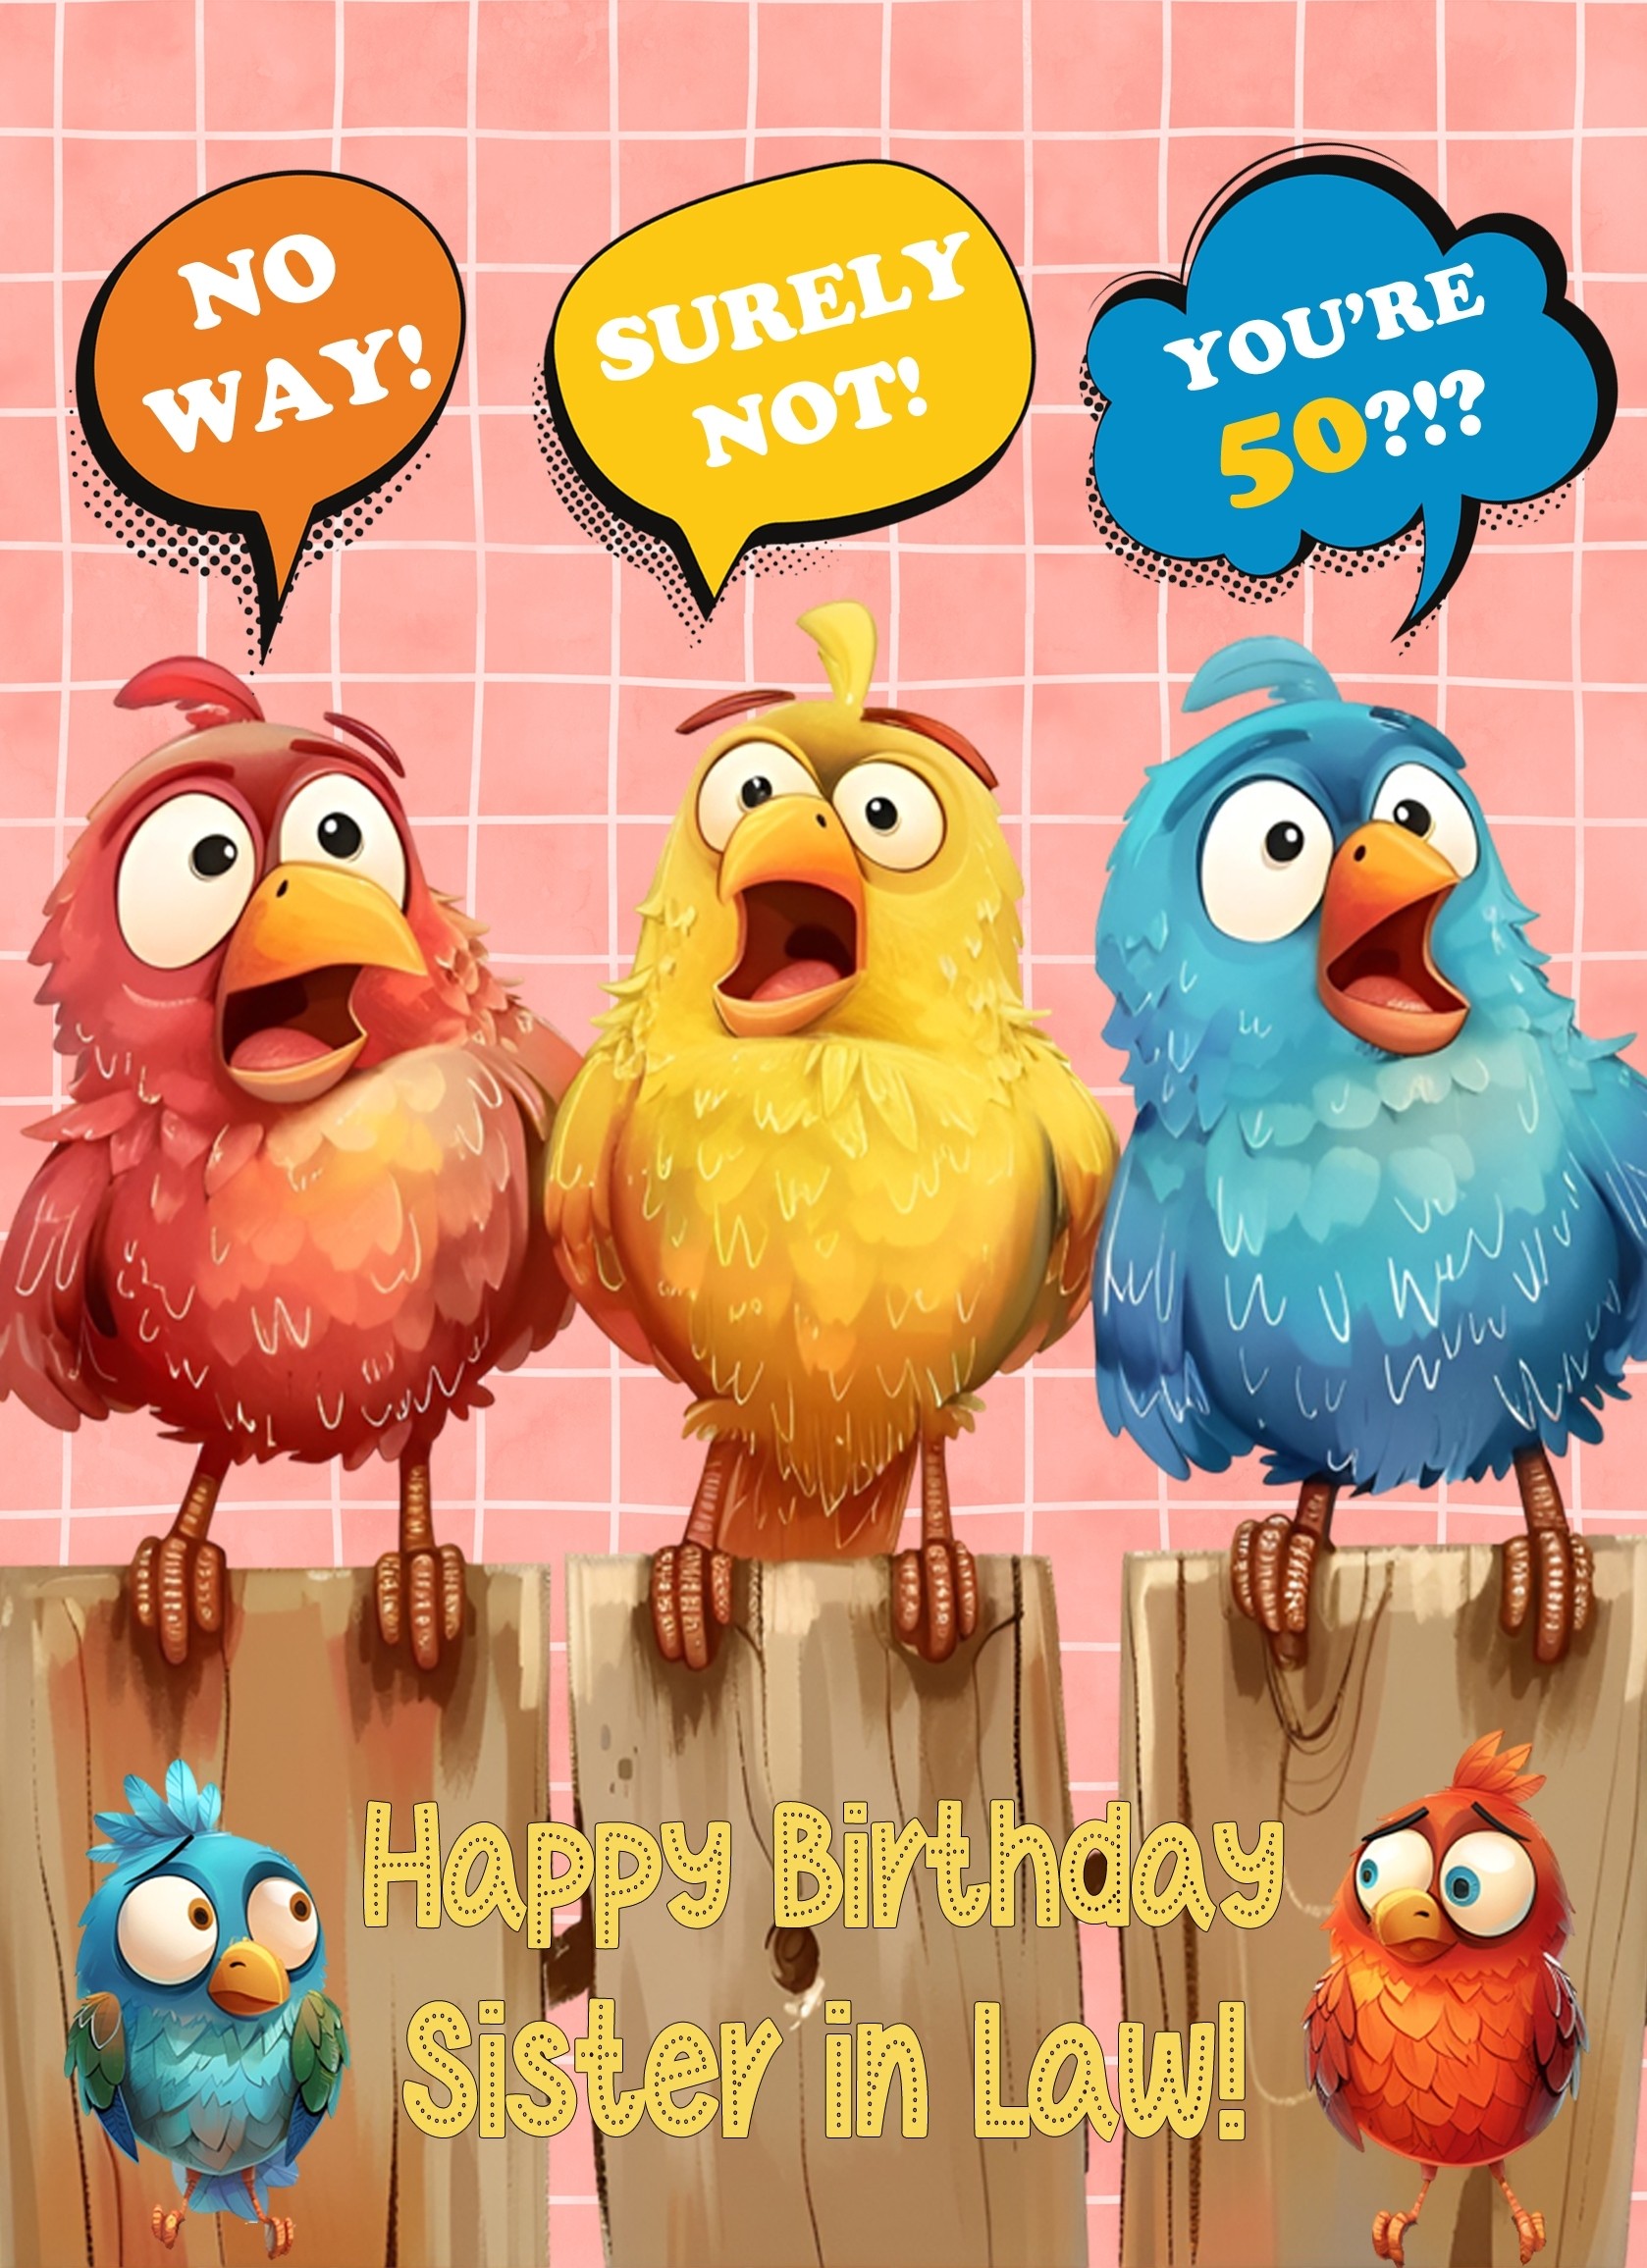 Sister in Law 50th Birthday Card (Funny Birds Surprised)